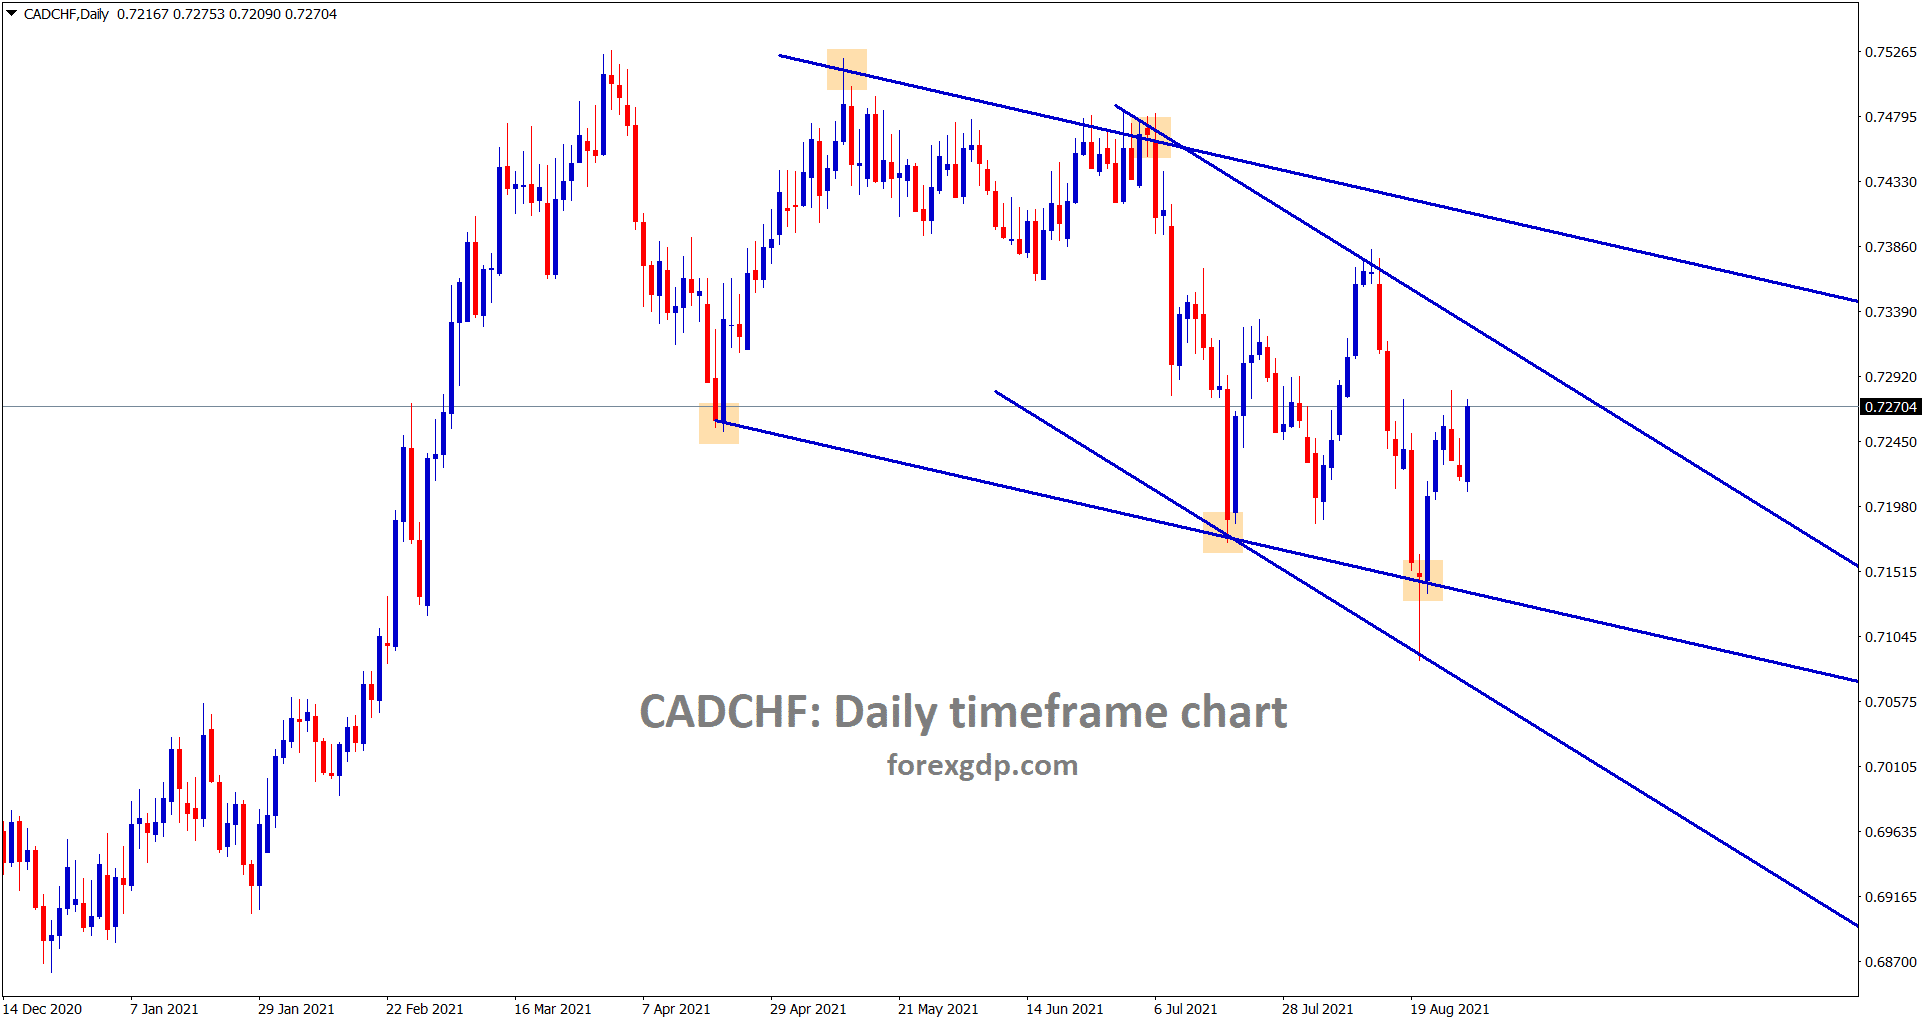 CADCHF is moving in a descending channel range